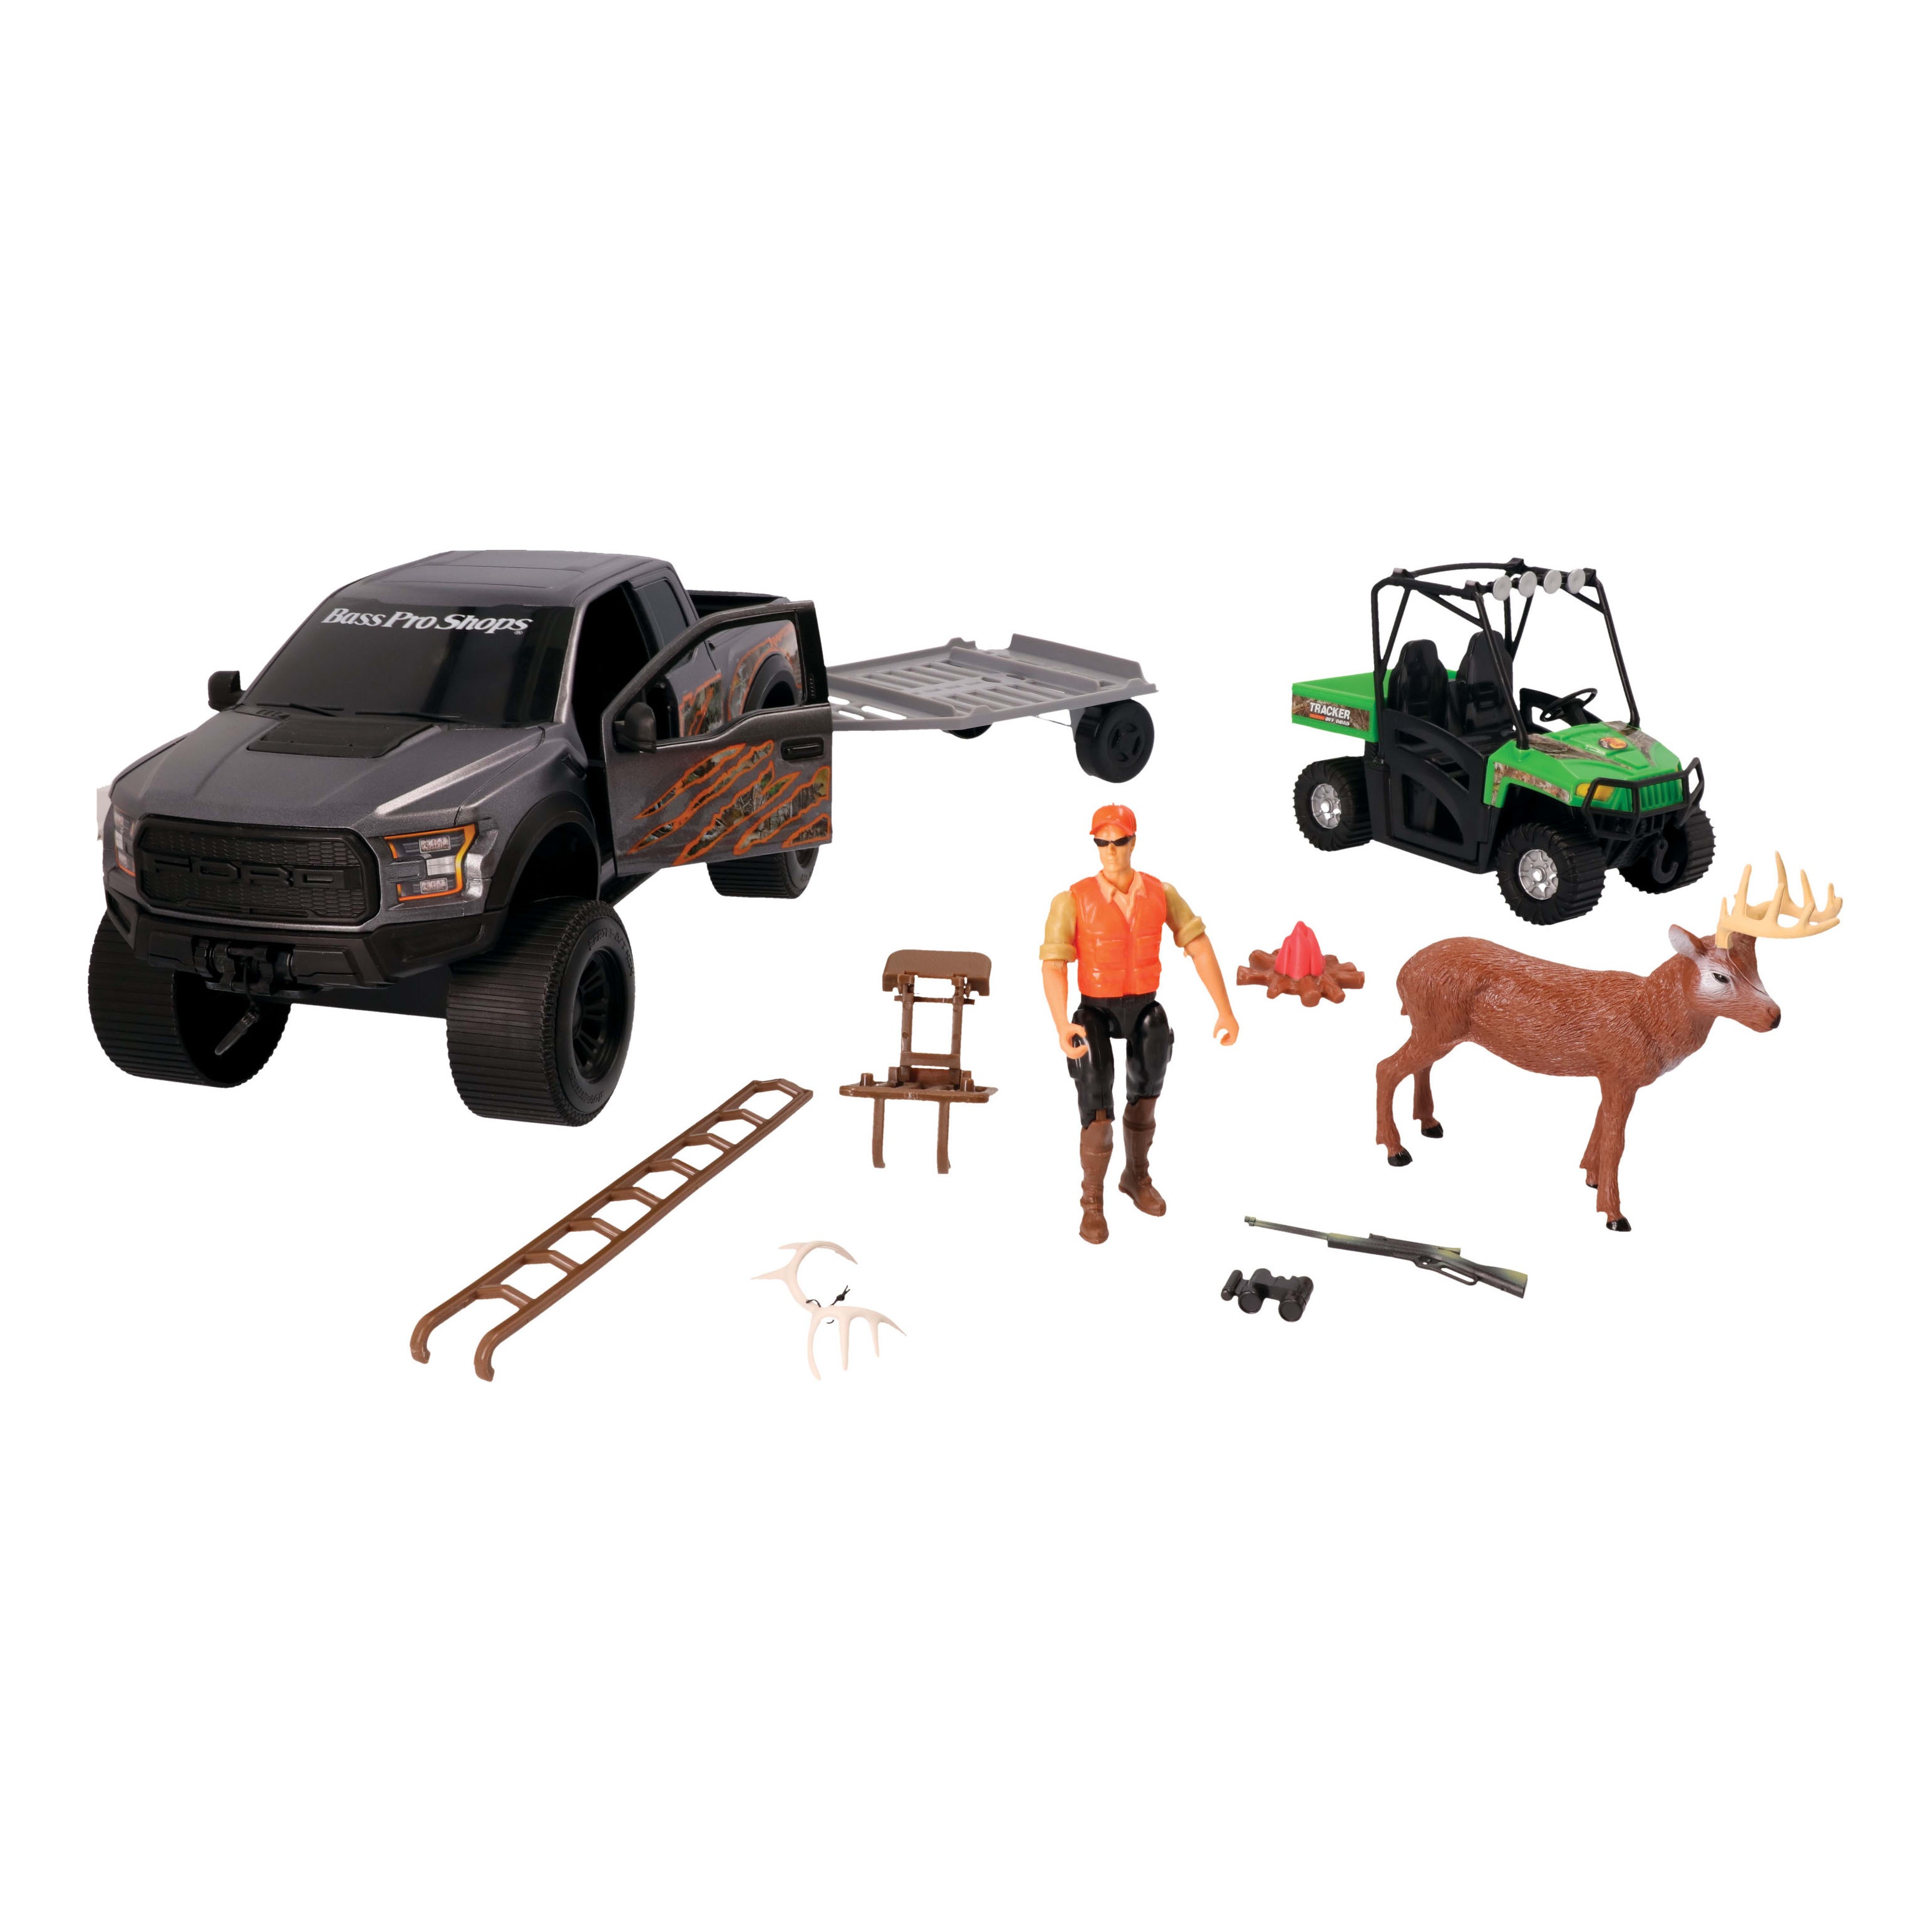 Bass Pro Shops® Deluxe Licensed Ford® Raptor Hunting TrueTimber® Camo Adventure Truck Play Set